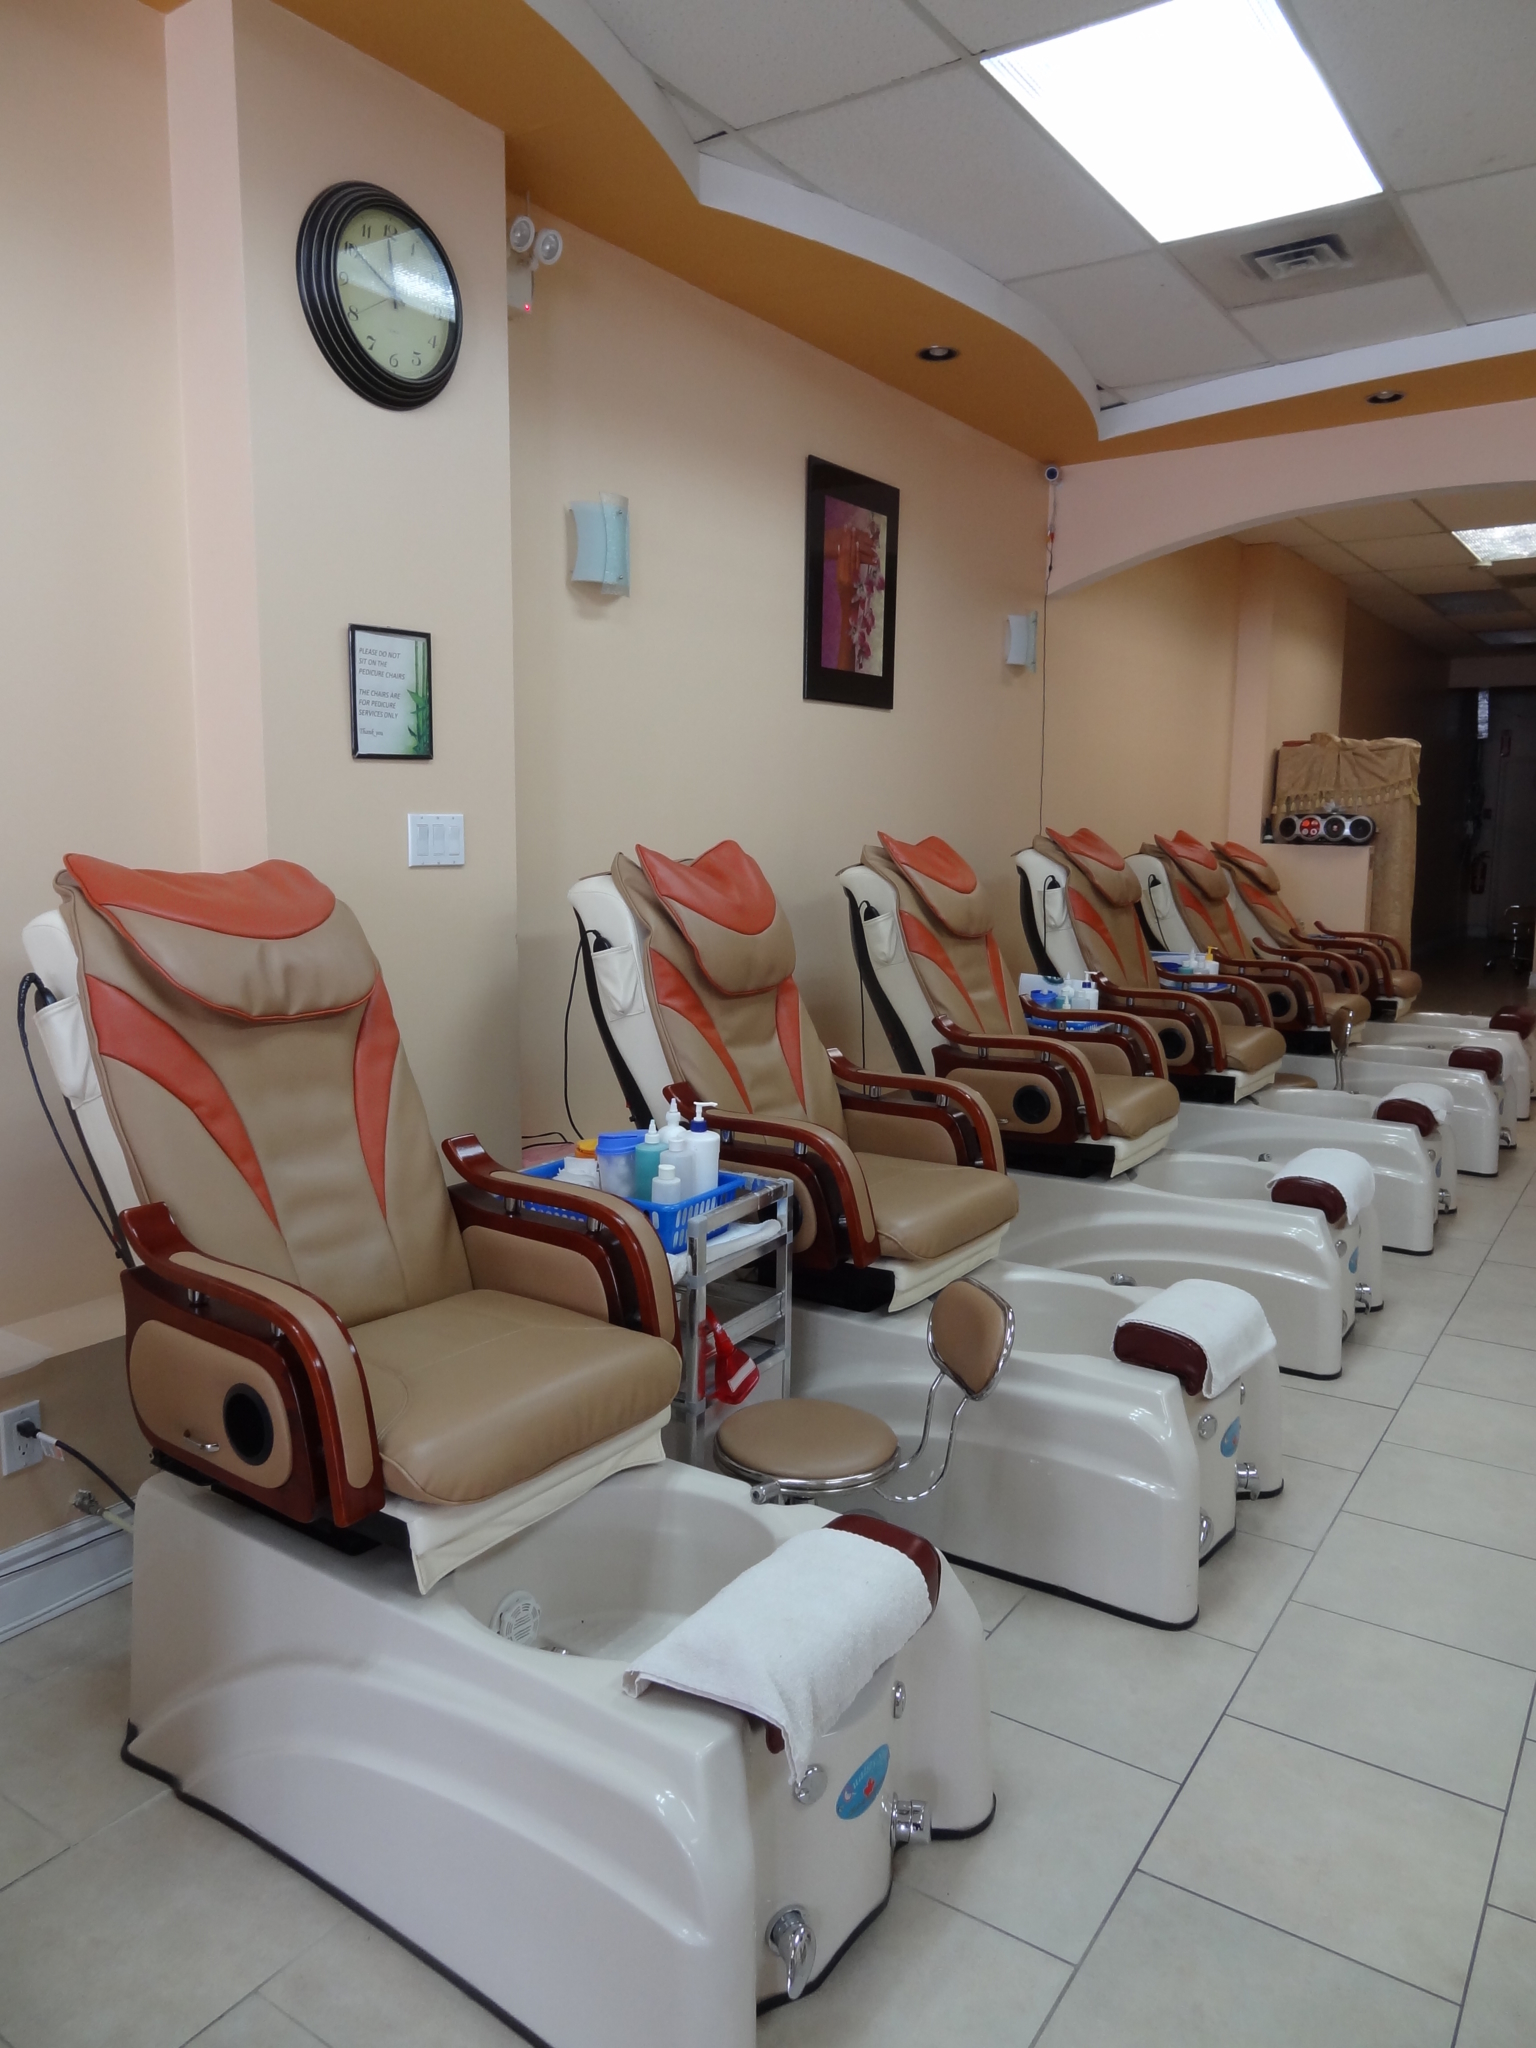 The Best Addresses For Manicure And Pedicure In Newmarket There Are 27 Results For Your Search Infobel Canada